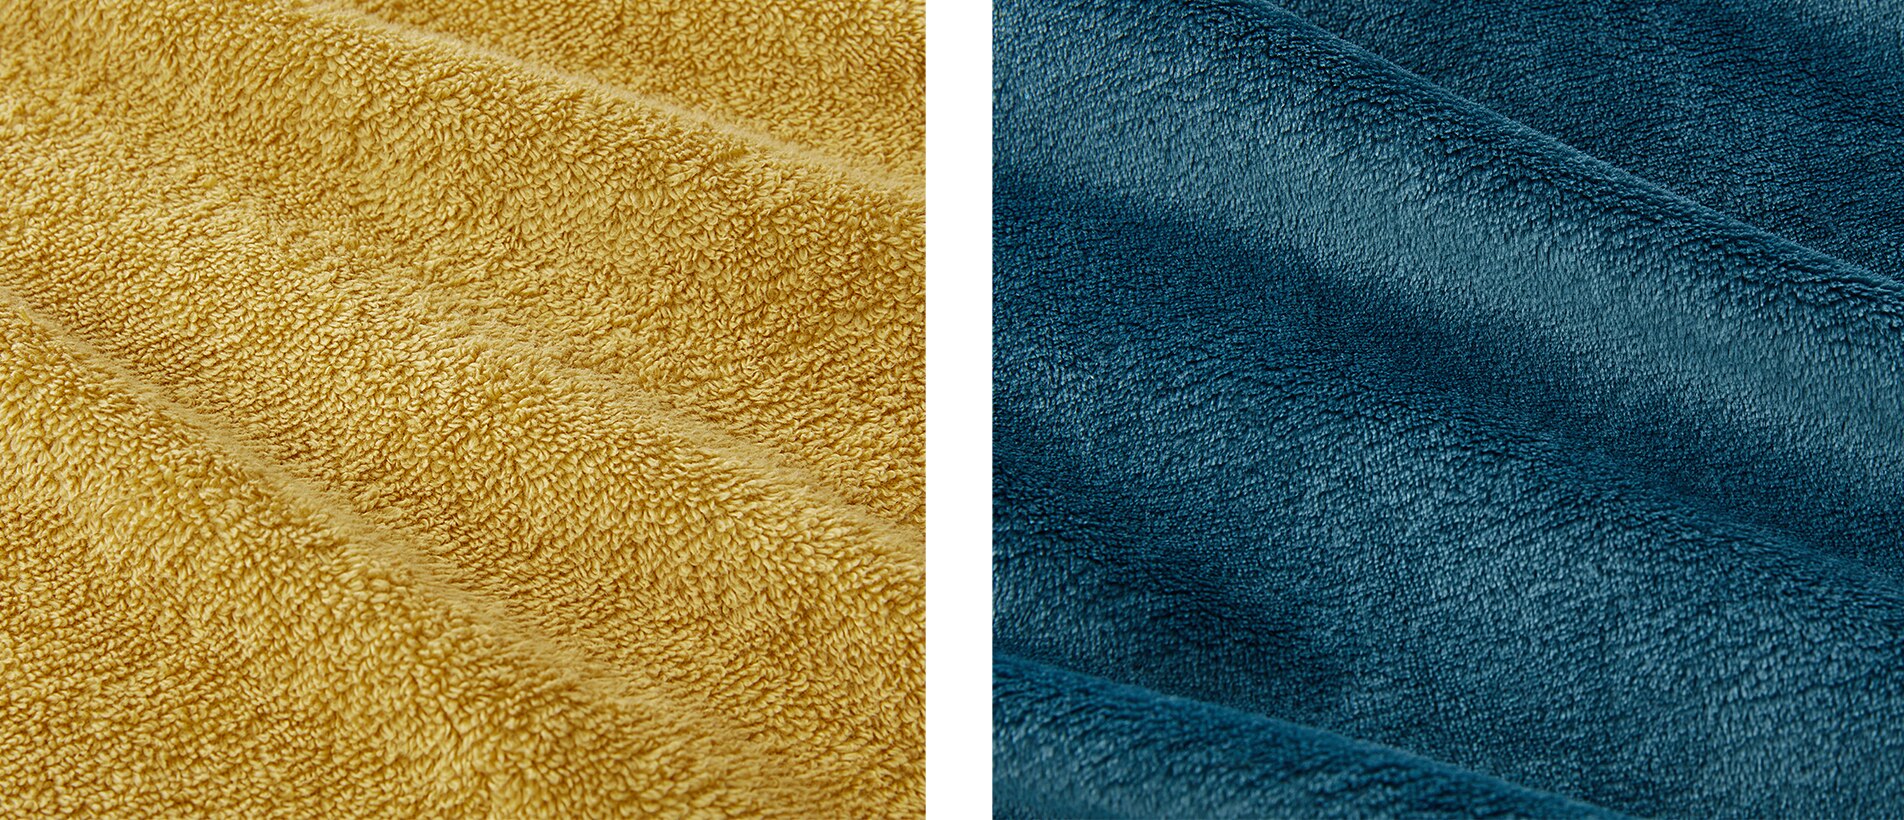 split image. left side, close up of yellow bath robe texture. left side, close up of blue plush dressing gown.